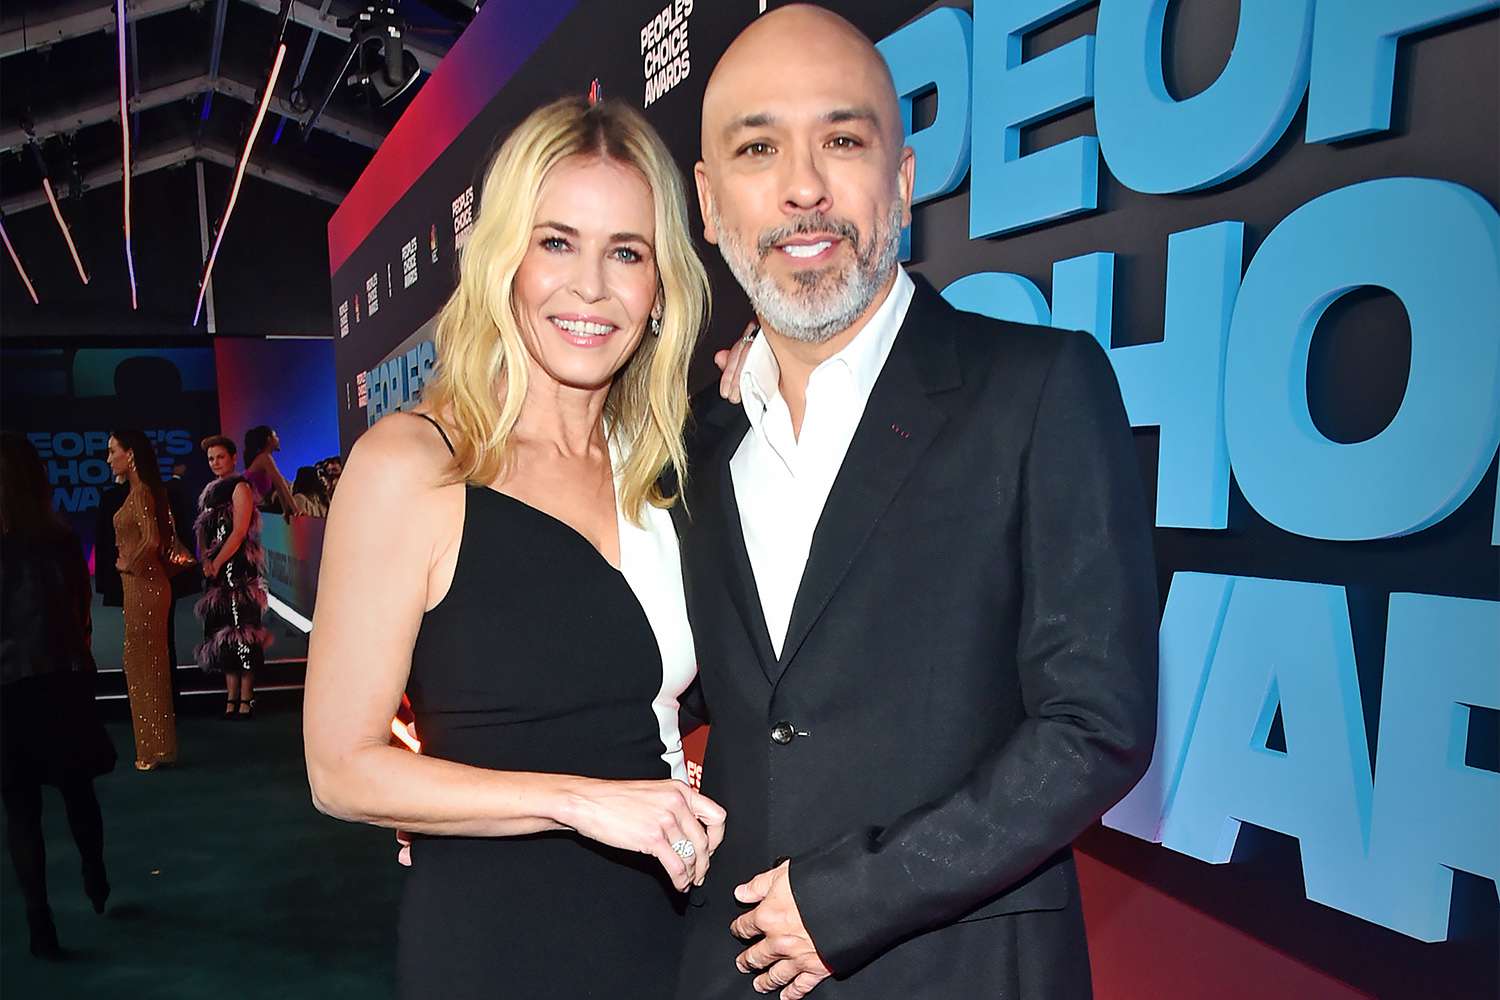 Jo Koy and Chelsea Handler broke up after dating for less than a year: "Please keep rooting for the both of us."